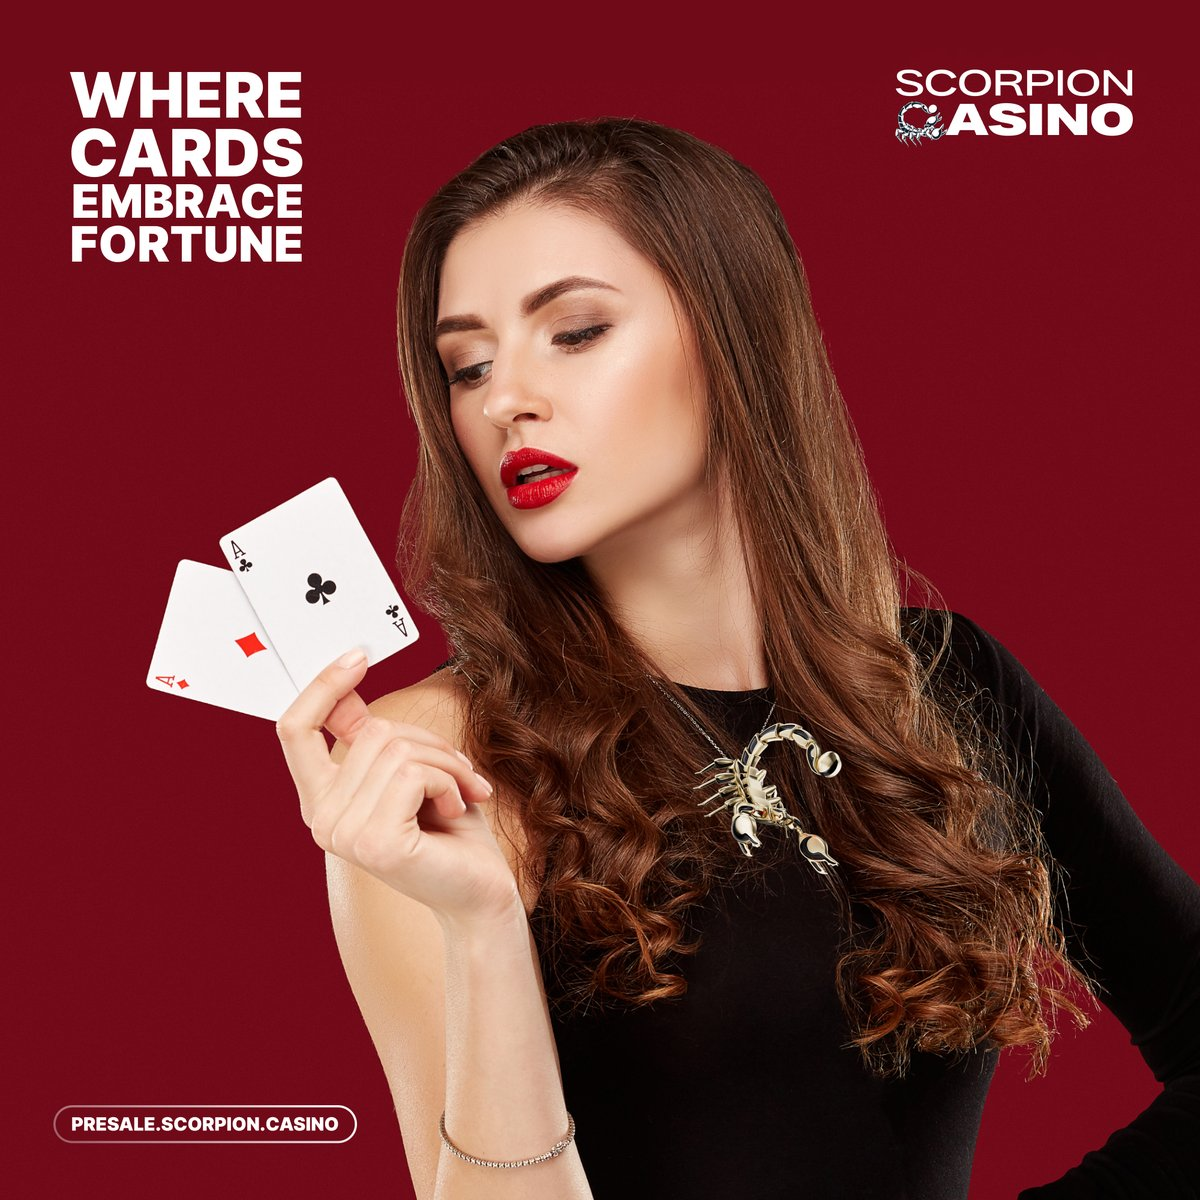 Scorpion Casino (SCORP) Continues To Make Great Progress With Presale As Many More Join This Casino Ecosystem